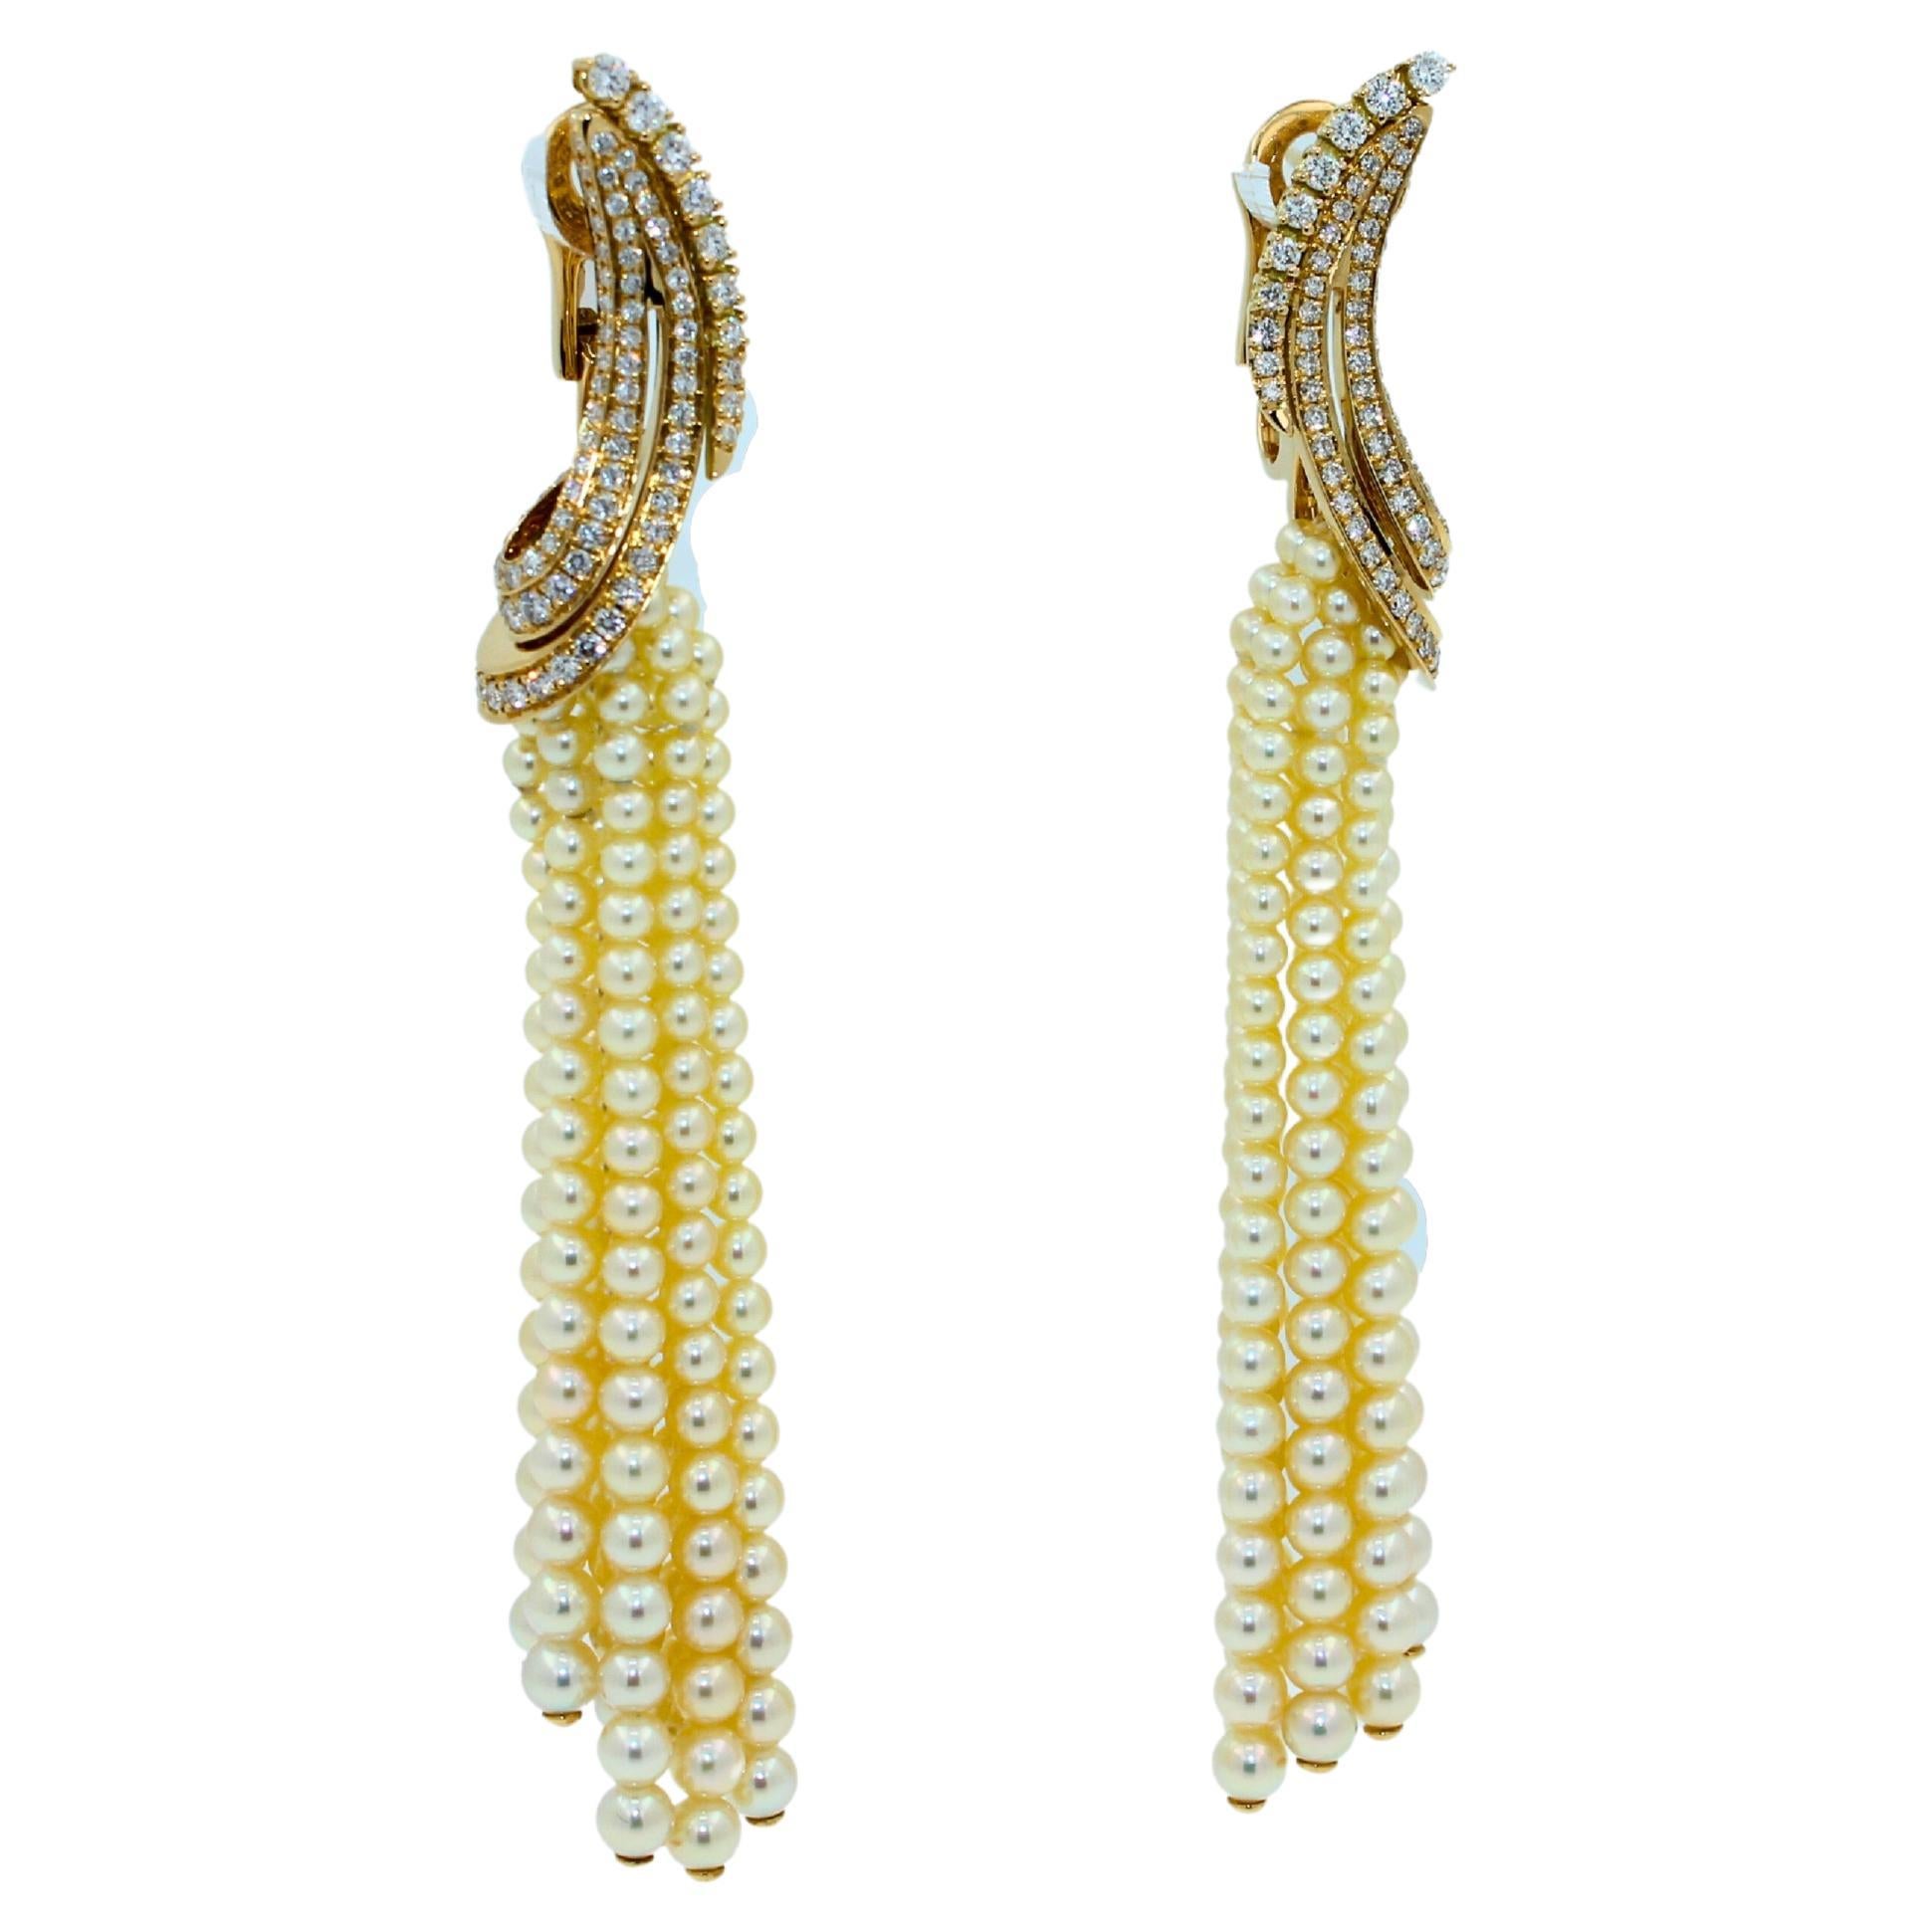 Akoya Pearl & Diamond Cascade Wave Earrings

Fun and playful, TWIST features rich ropes and/or multi-strand of Baby Akoya Pearls.  TWIST’s Baby Akoya’s range from 5mm to very rare 2.5mm in diameter Akoya pearls.  Each pearl is hand-picked and